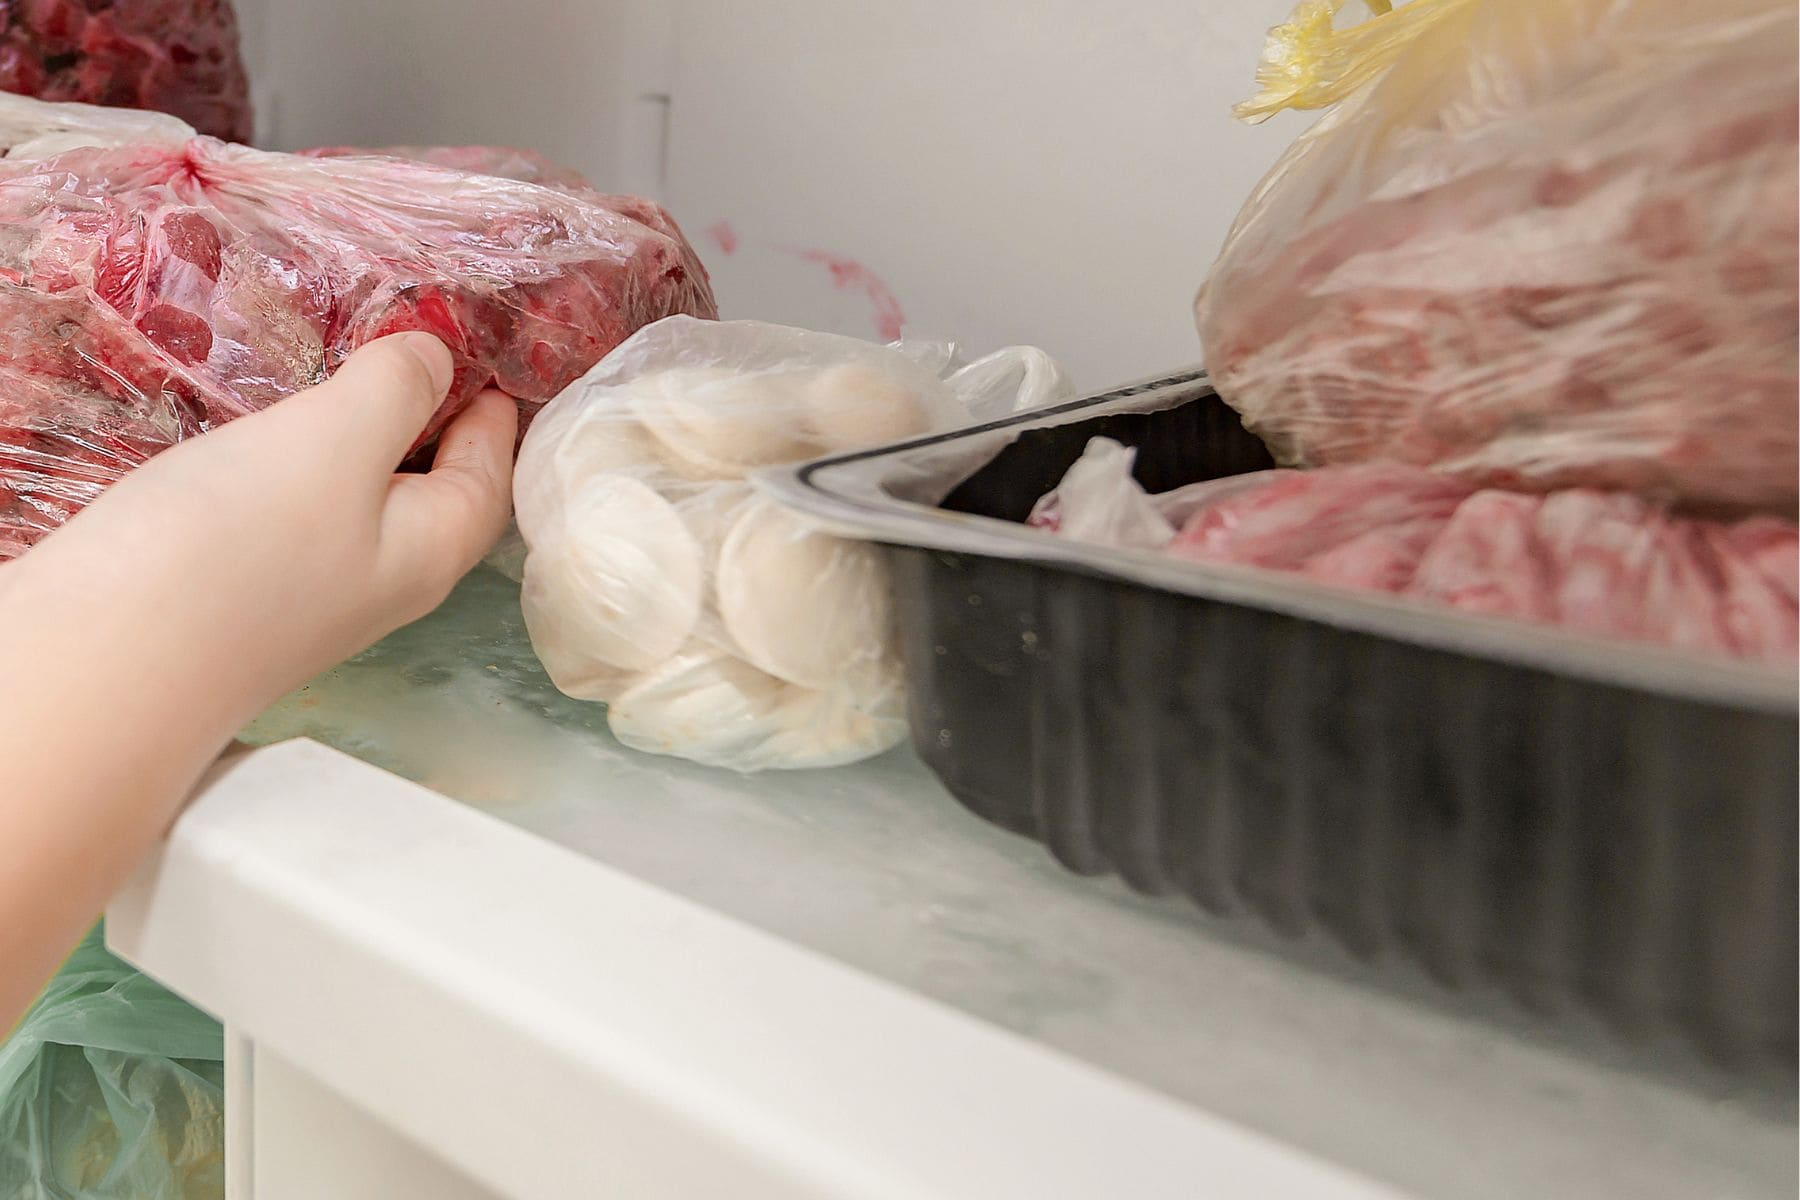 A woman puts frozen fruit products in the freezer, for long-term preservation.